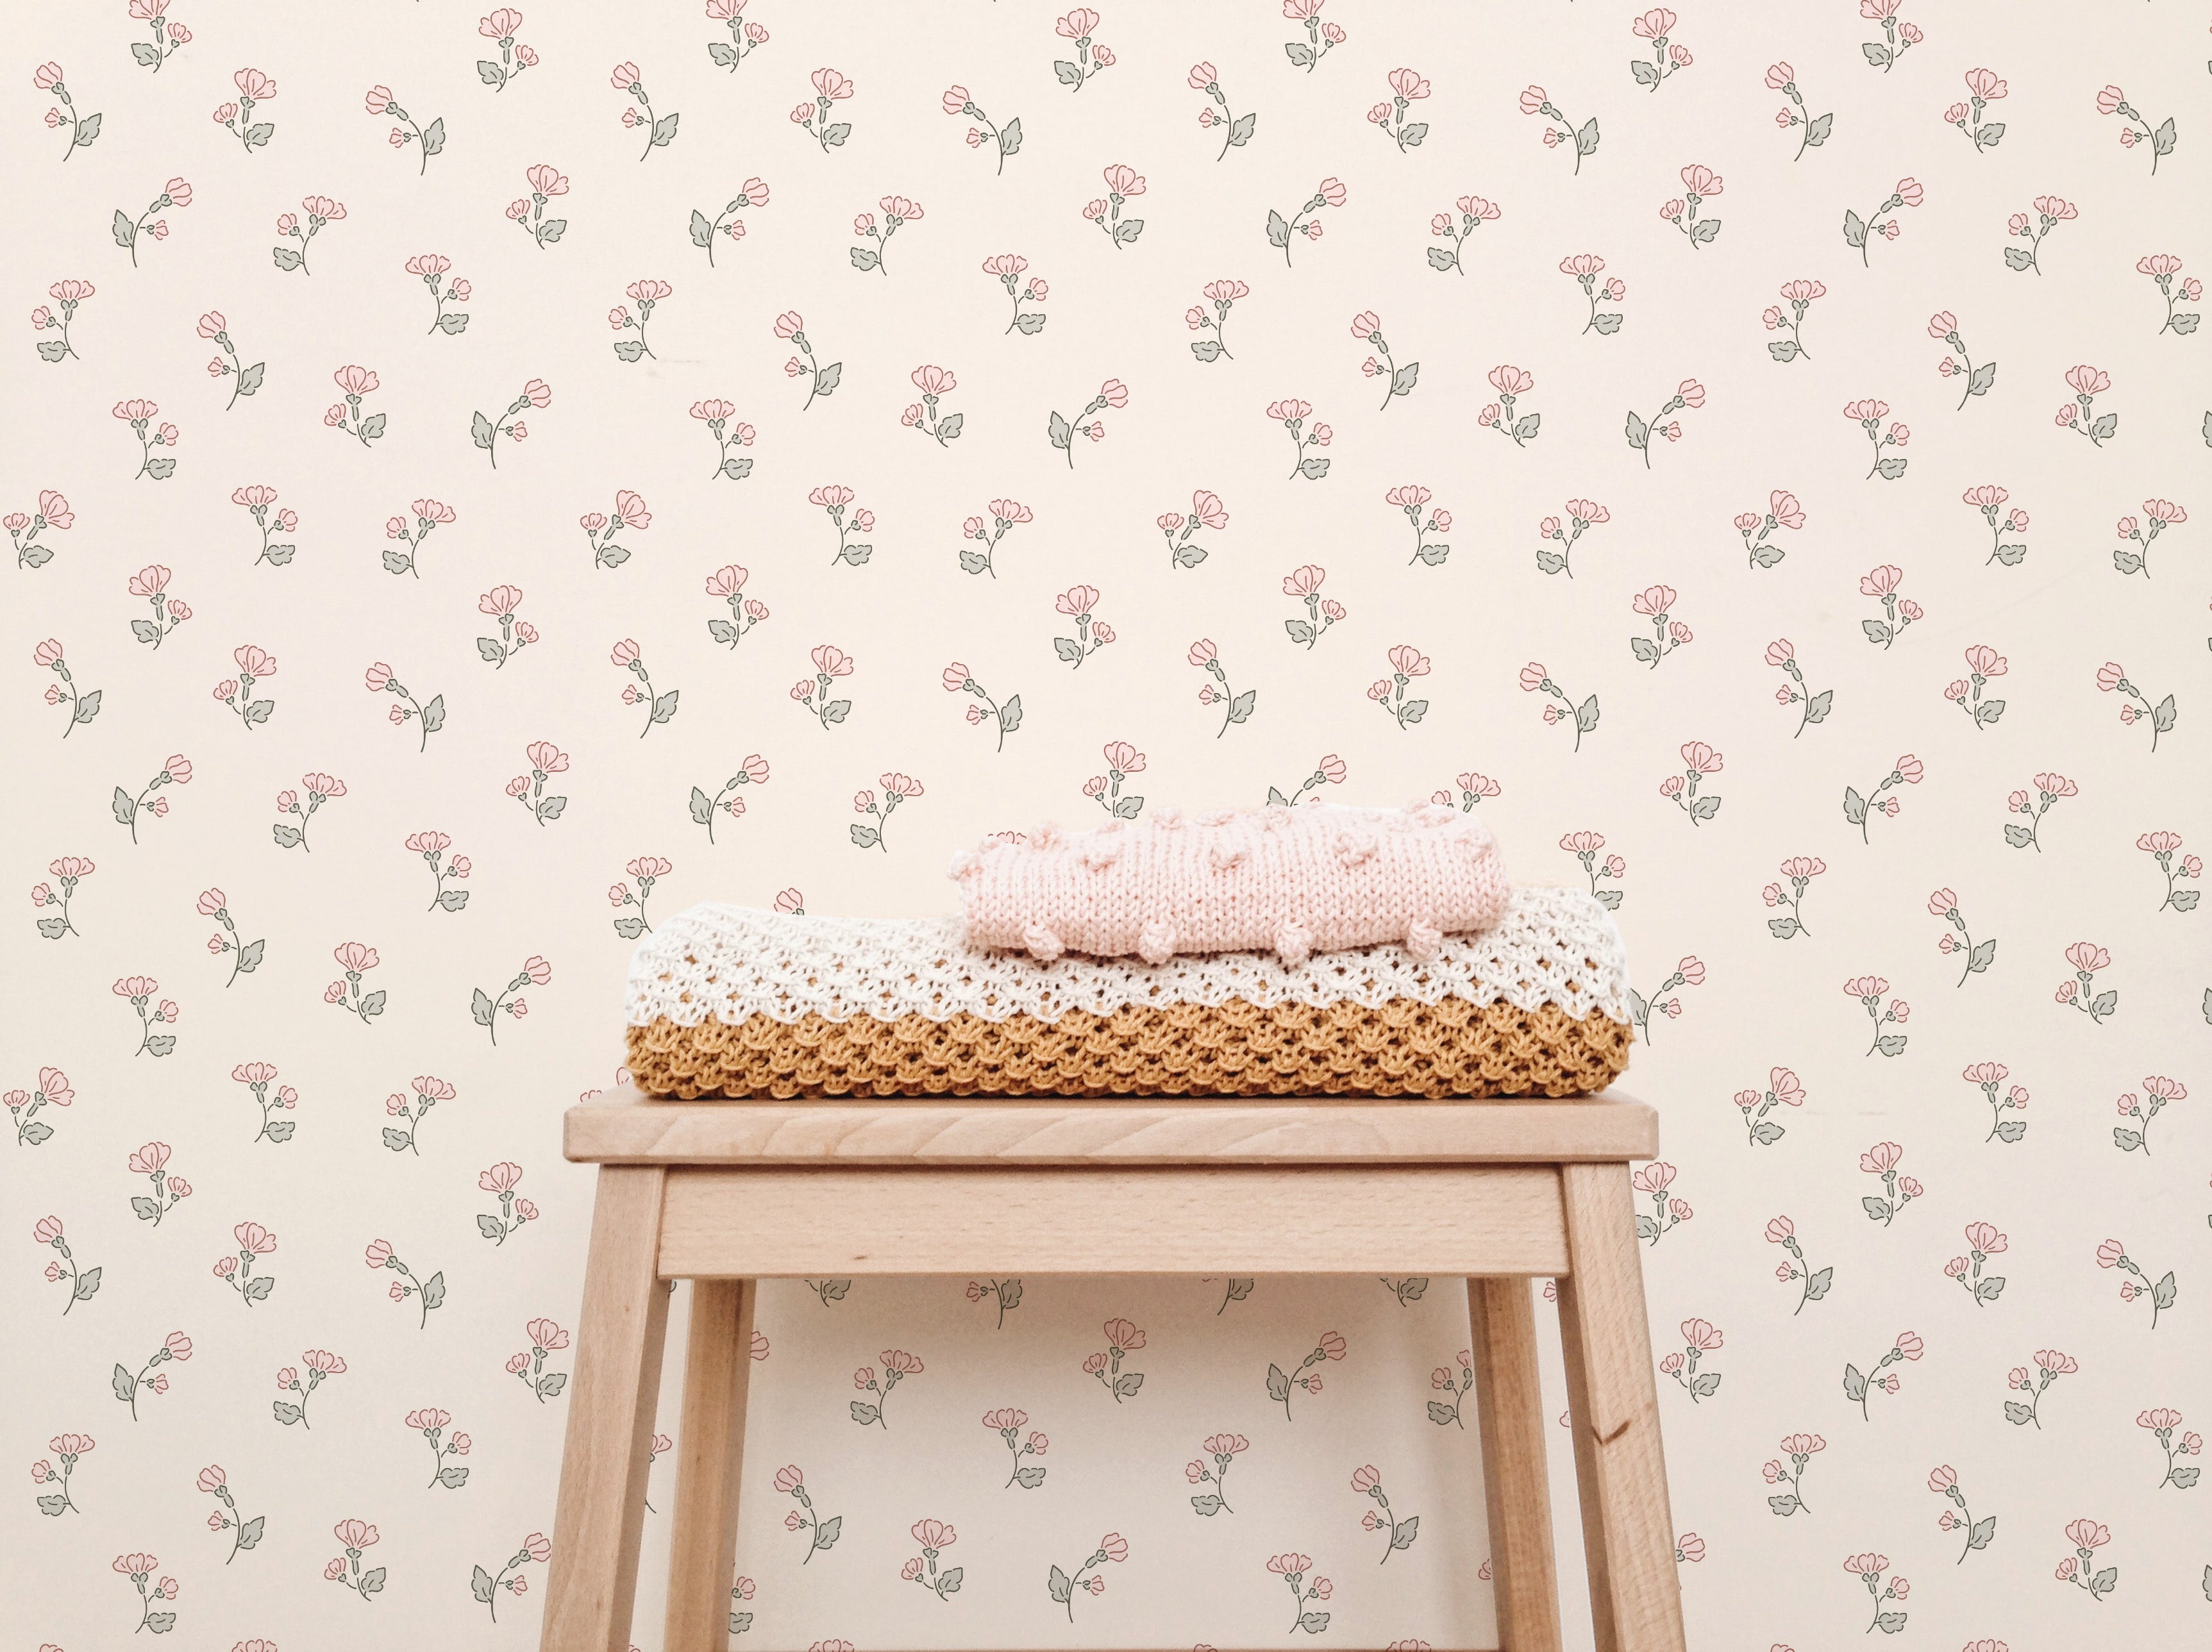 A gentle and inviting nursery scene with Chara Wallpaper, which displays a delicate pattern of small pink and green floral sprigs on a soft peach background. A wooden stool is placed against the wall, topped with a stack of hand-knitted blankets in pink, white, and brown, adding a cozy touch to the decor.